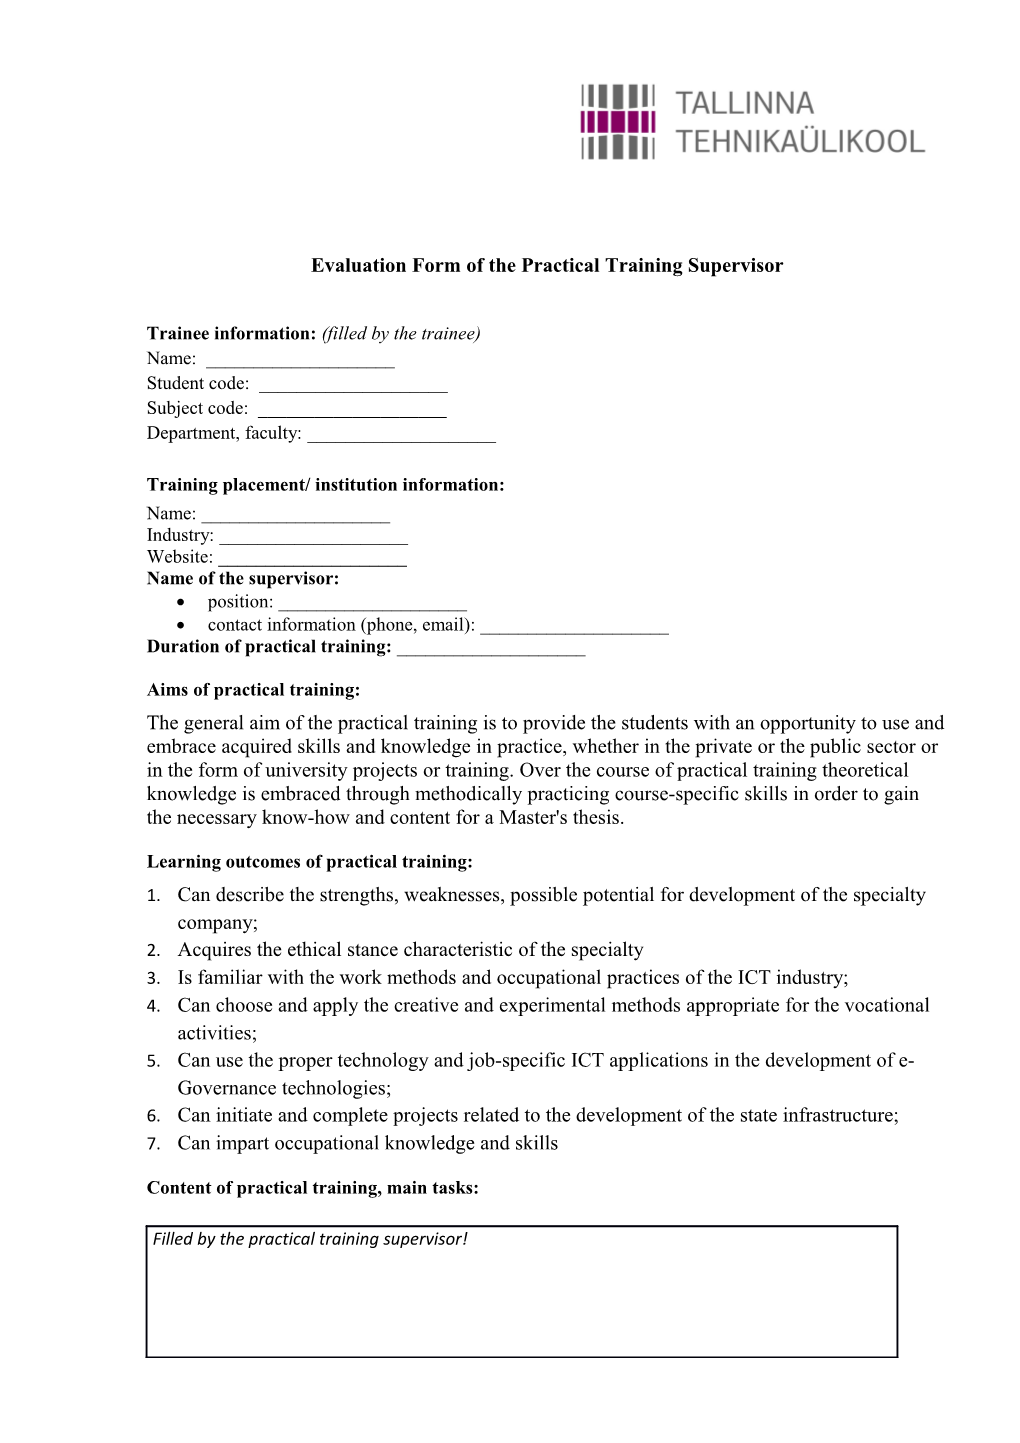 Evaluation Form of the Practical Training Supervisor